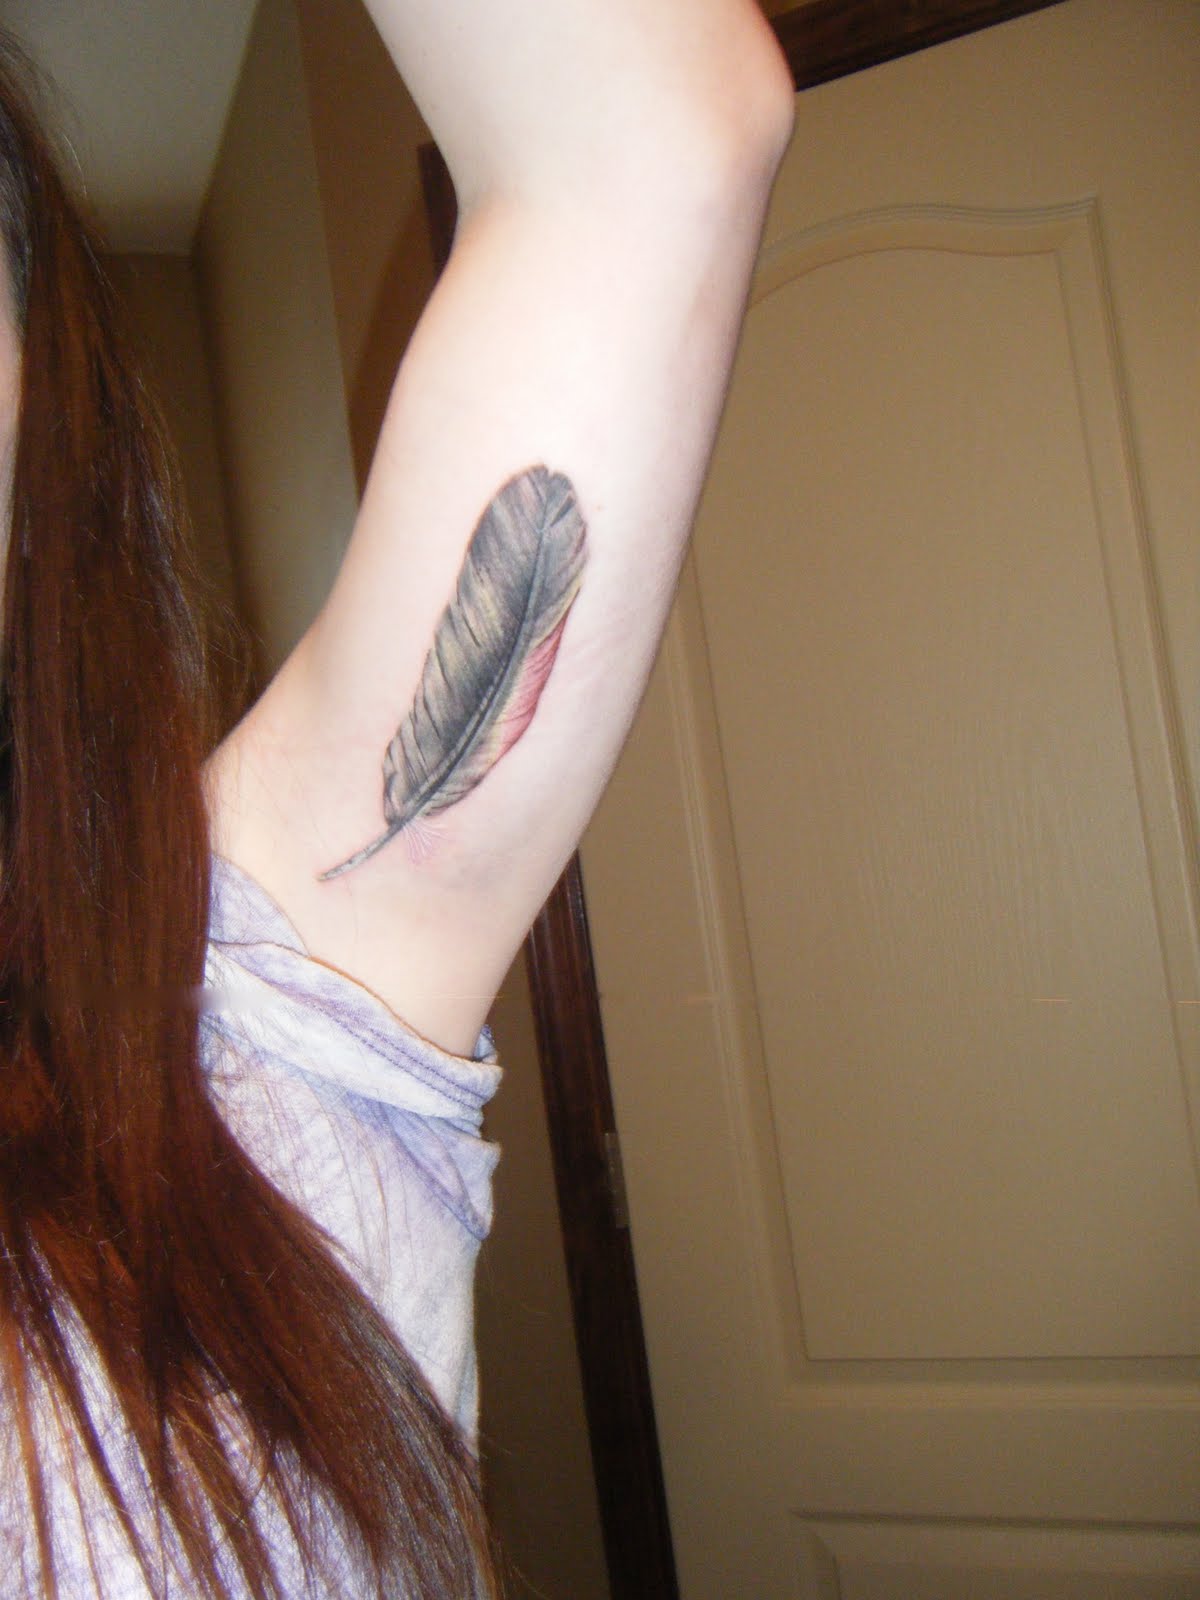 Getting my feather tattoo. I love it. :)